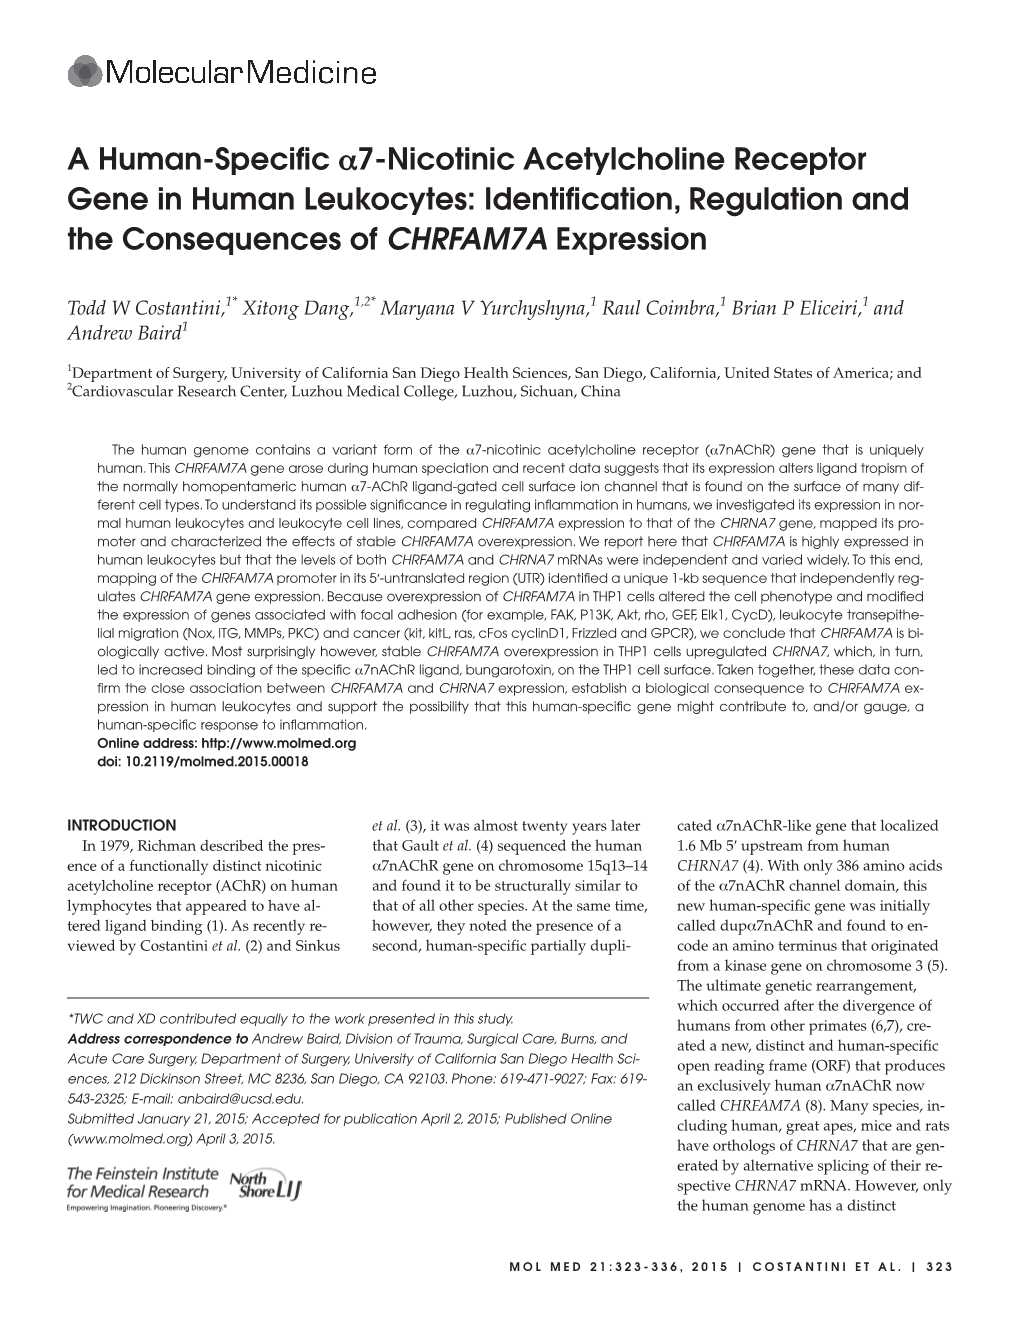 A Human-Specific A7-Nicotinic Acetylcholine Receptor Gene In